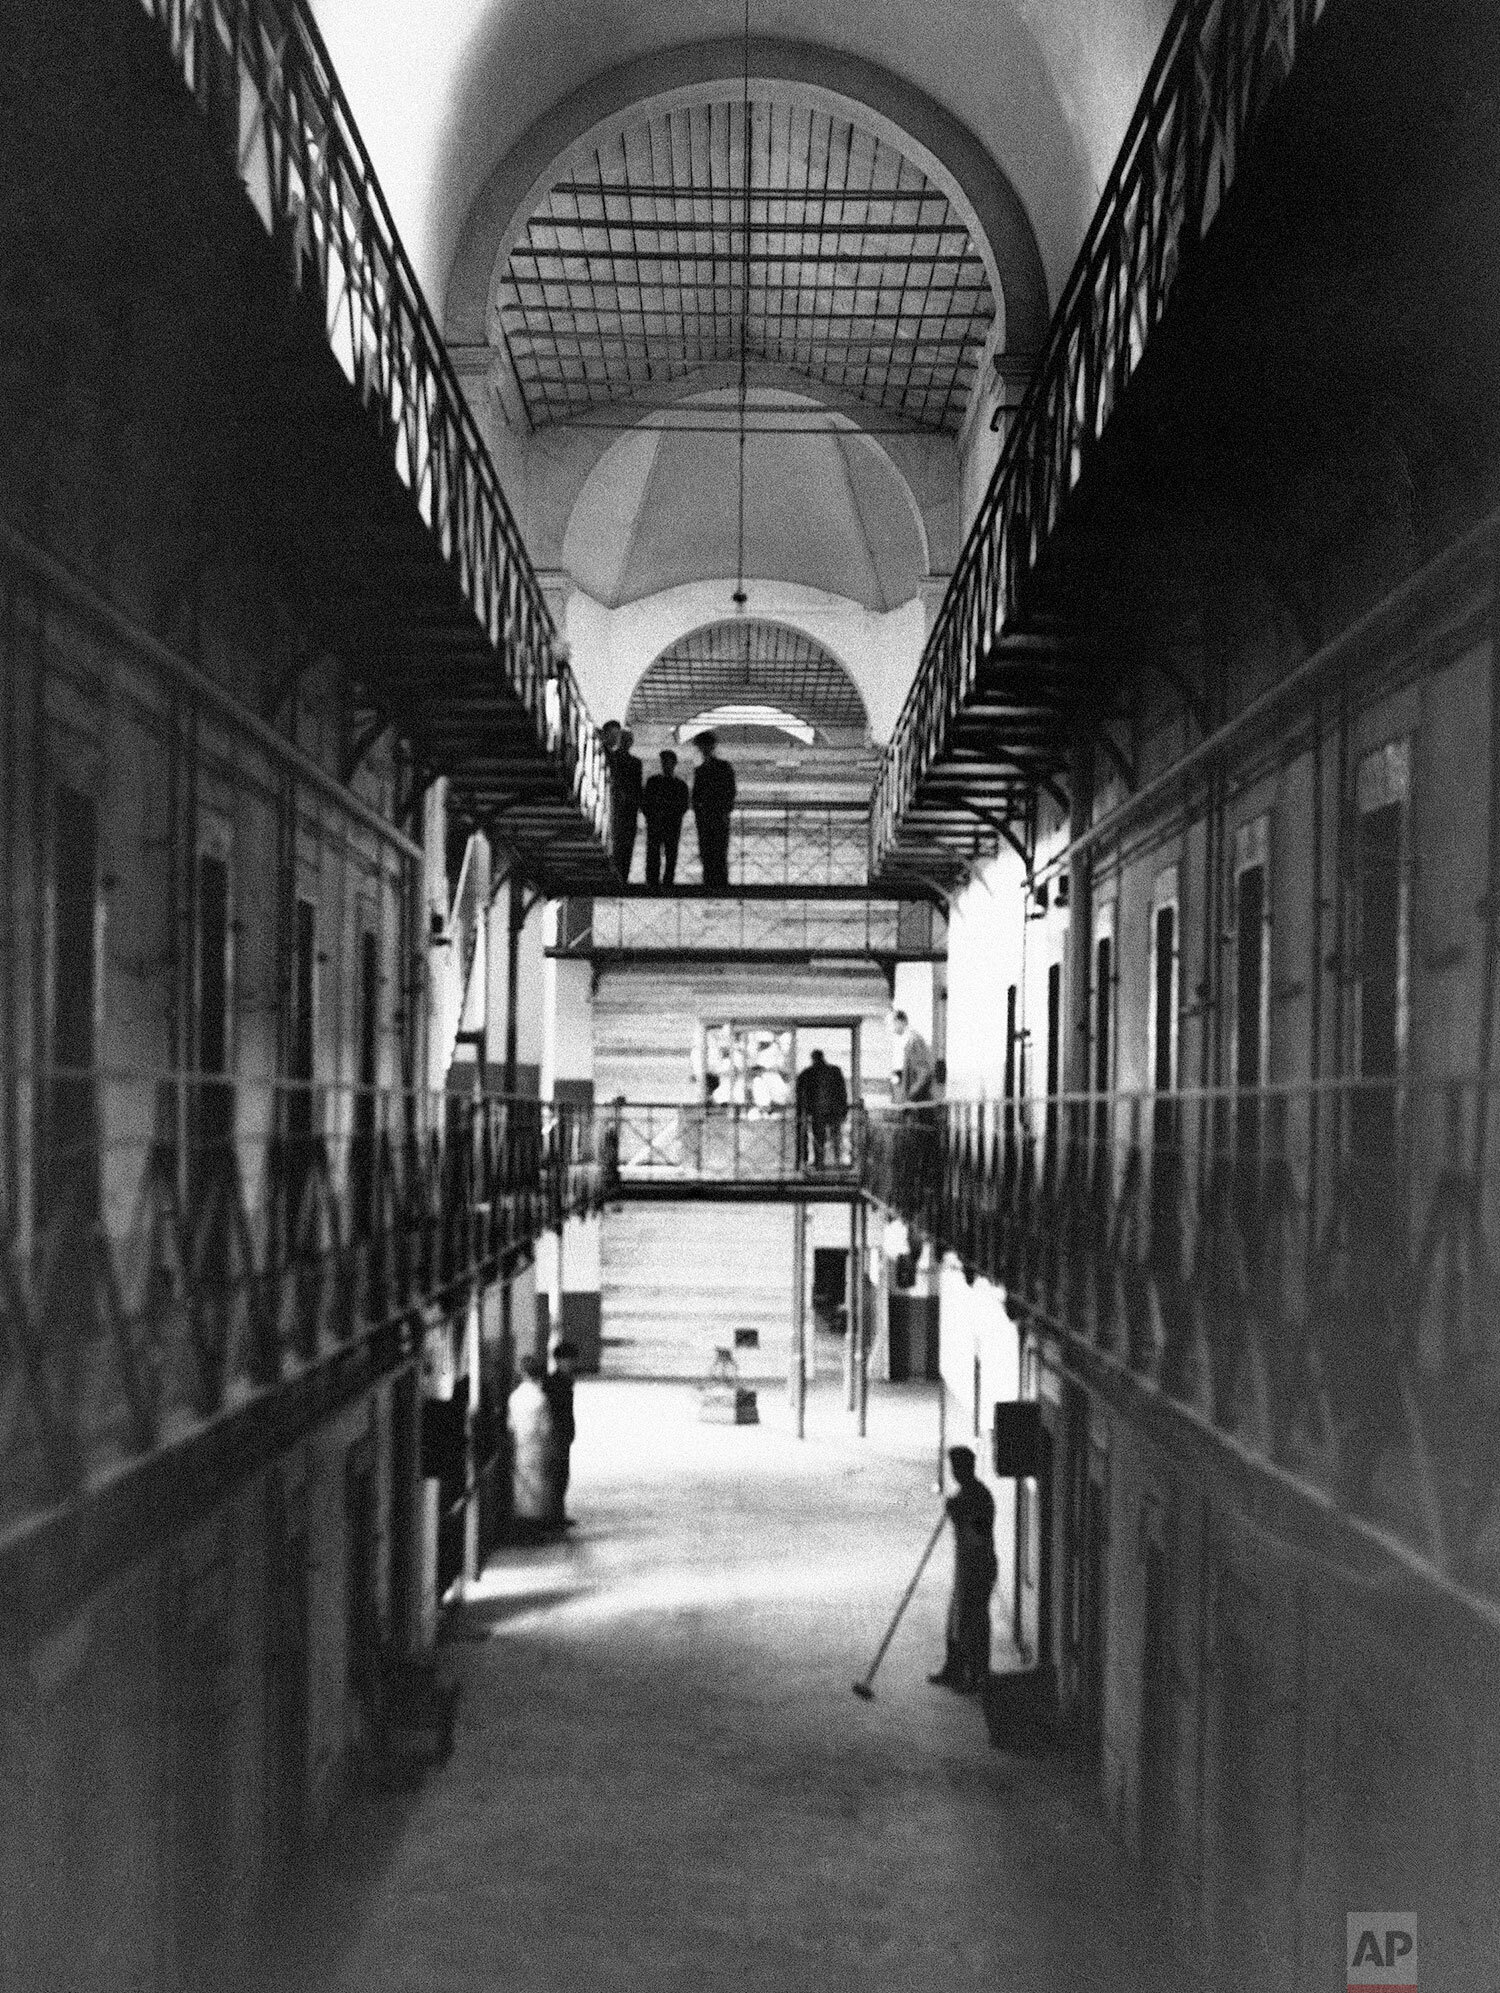  The cell block in the Nuremberg prison, Germany, on Aug. 30, 1945, which will house war criminals awaiting trial. At the end is seen a boarded up section where important prisoners will be housed. (AP Photo) 